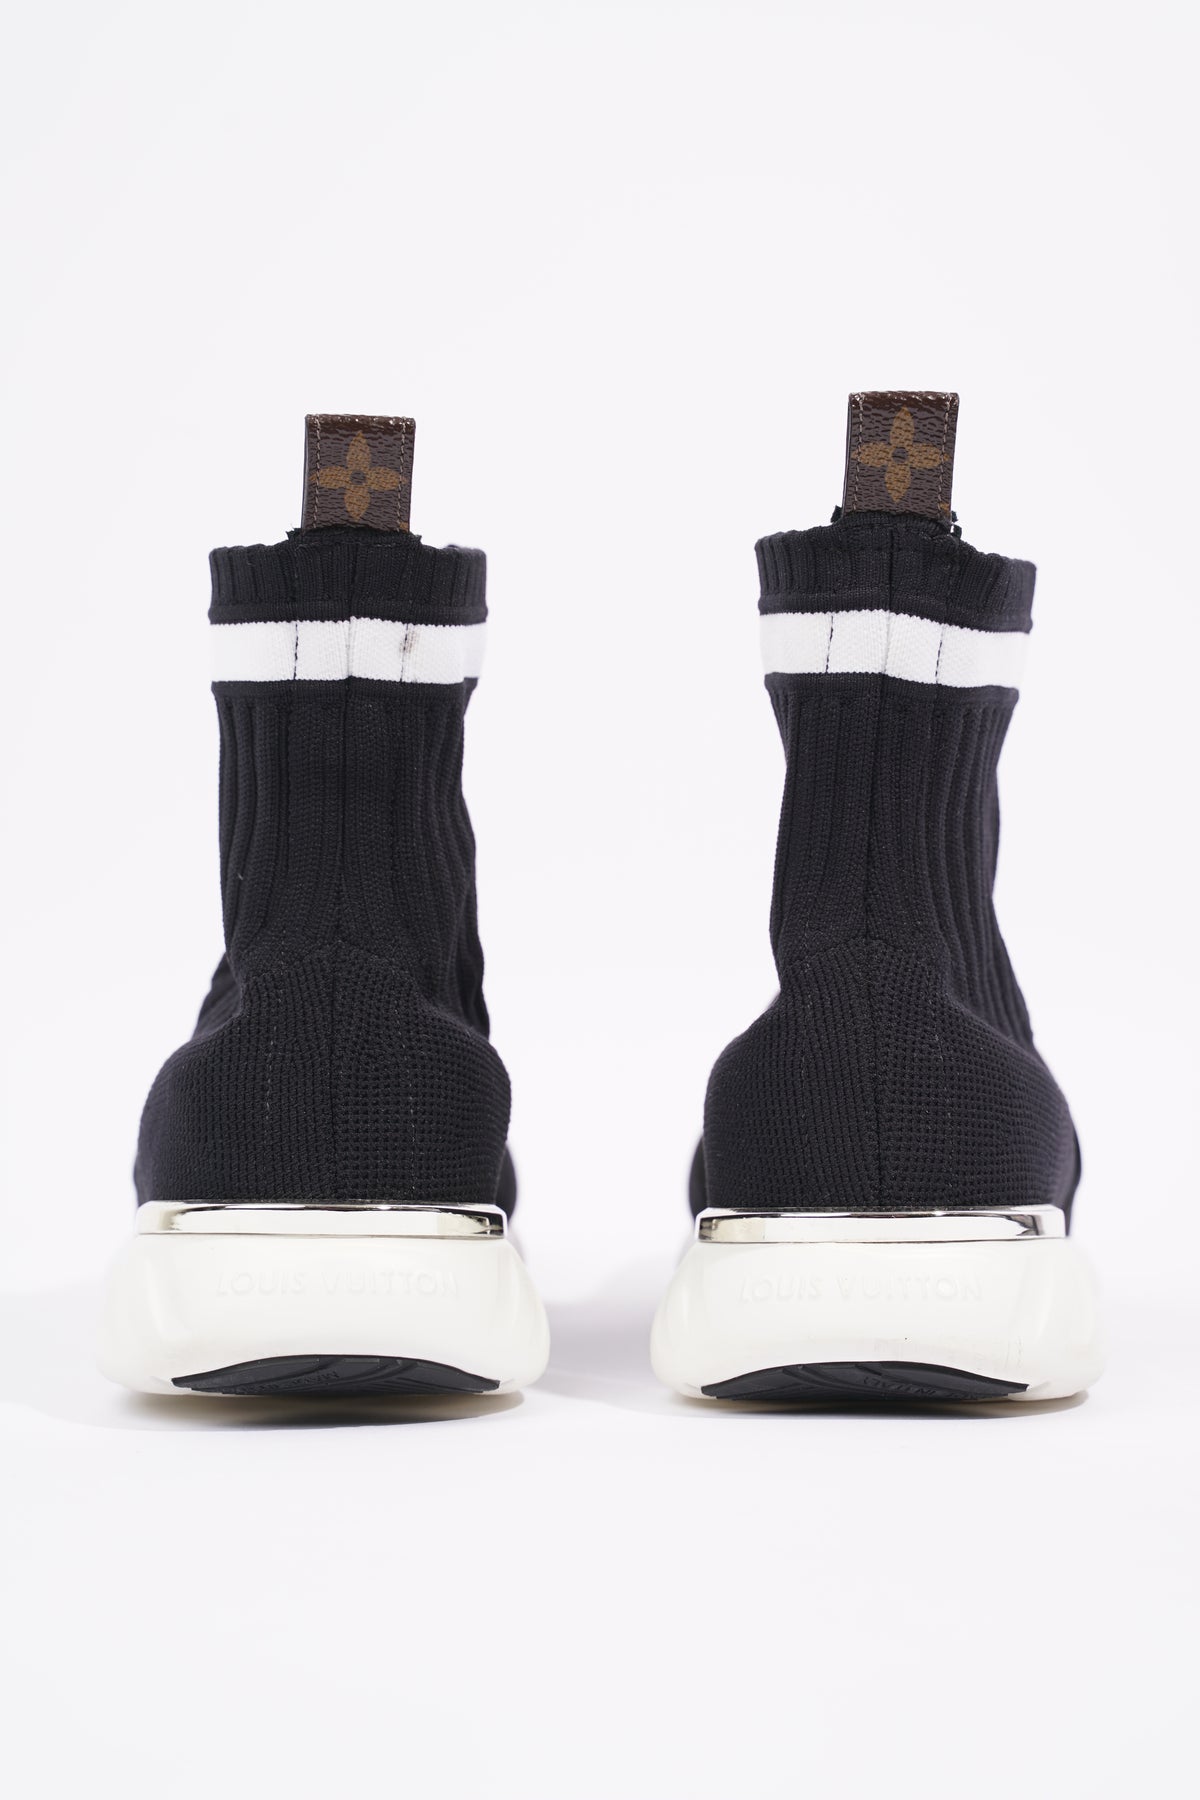 Louis Vuitton Womens Aftergame Sock Sneaker Black / White EU 38 / UK 5 –  Luxe Collective